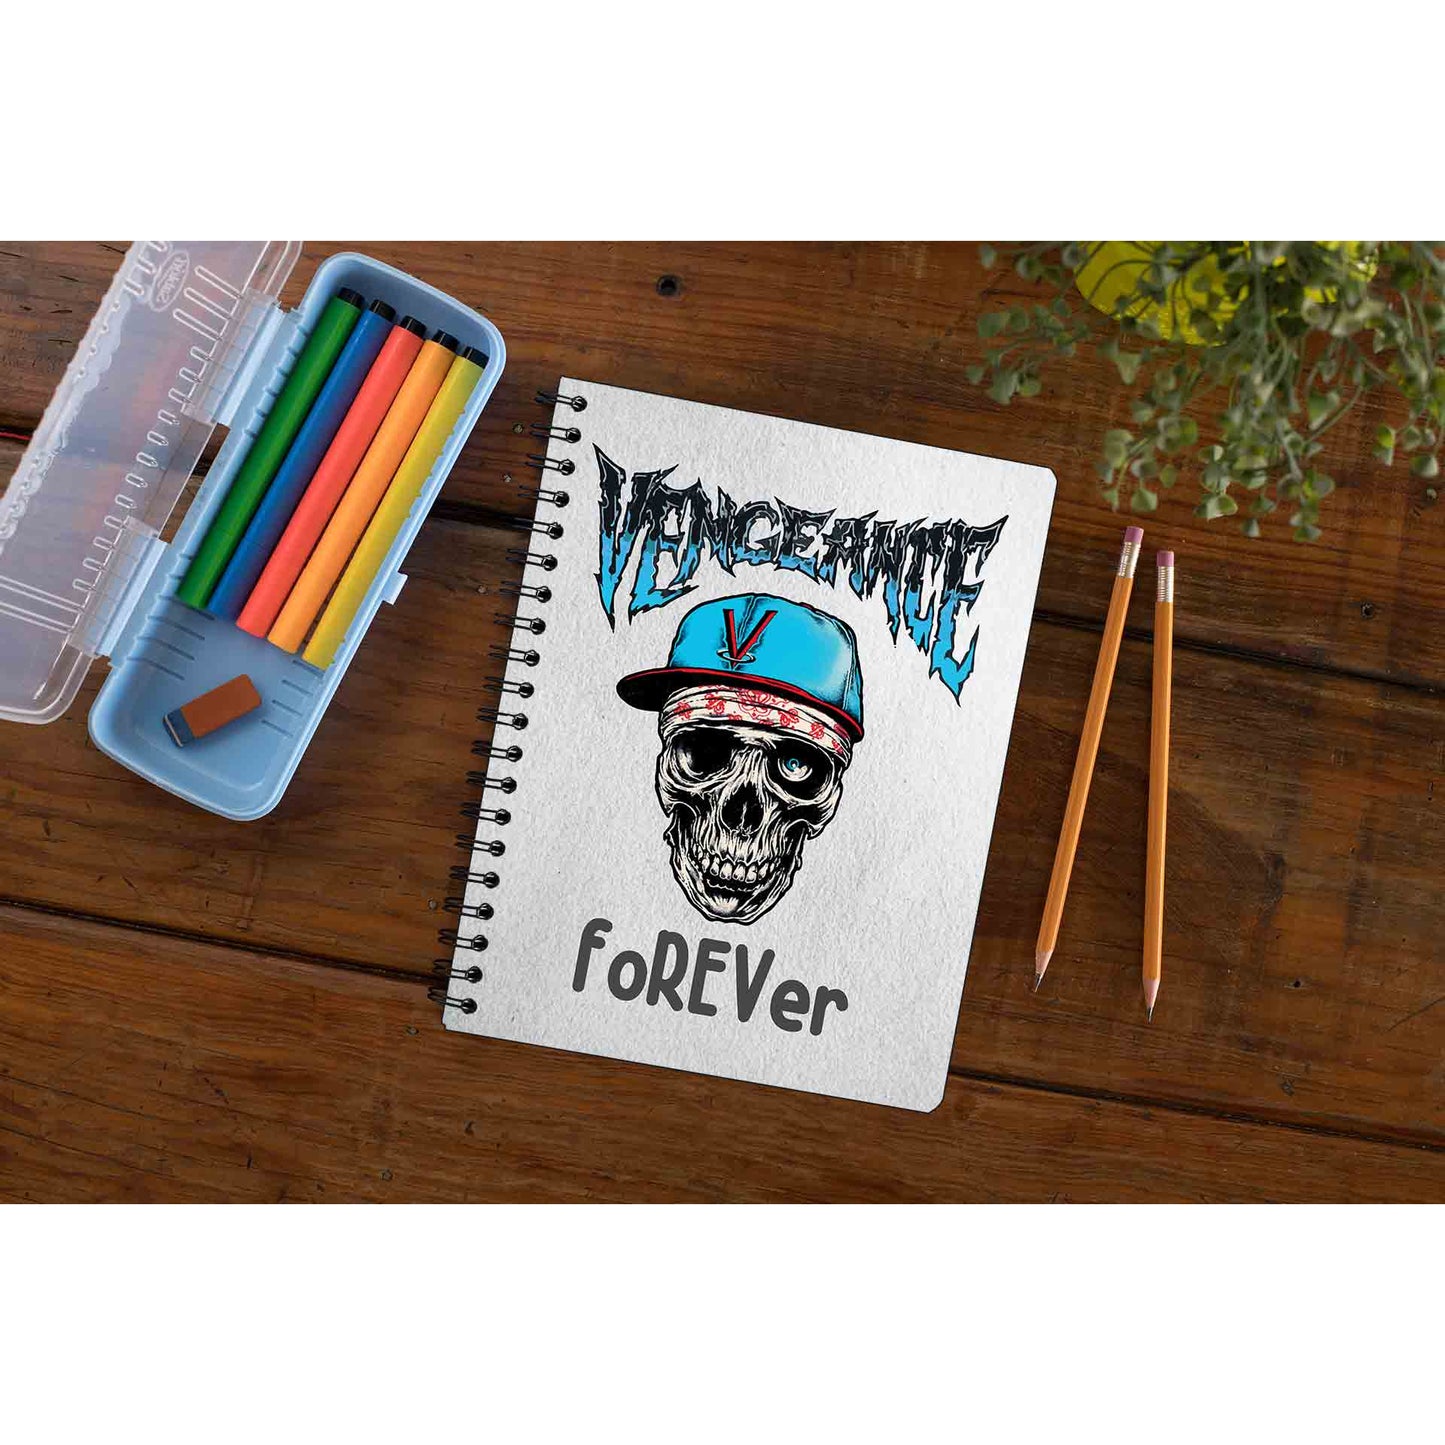 avenged sevenfold vengeance forever notebook notepad diary buy online india the banyan tee tbt unruled